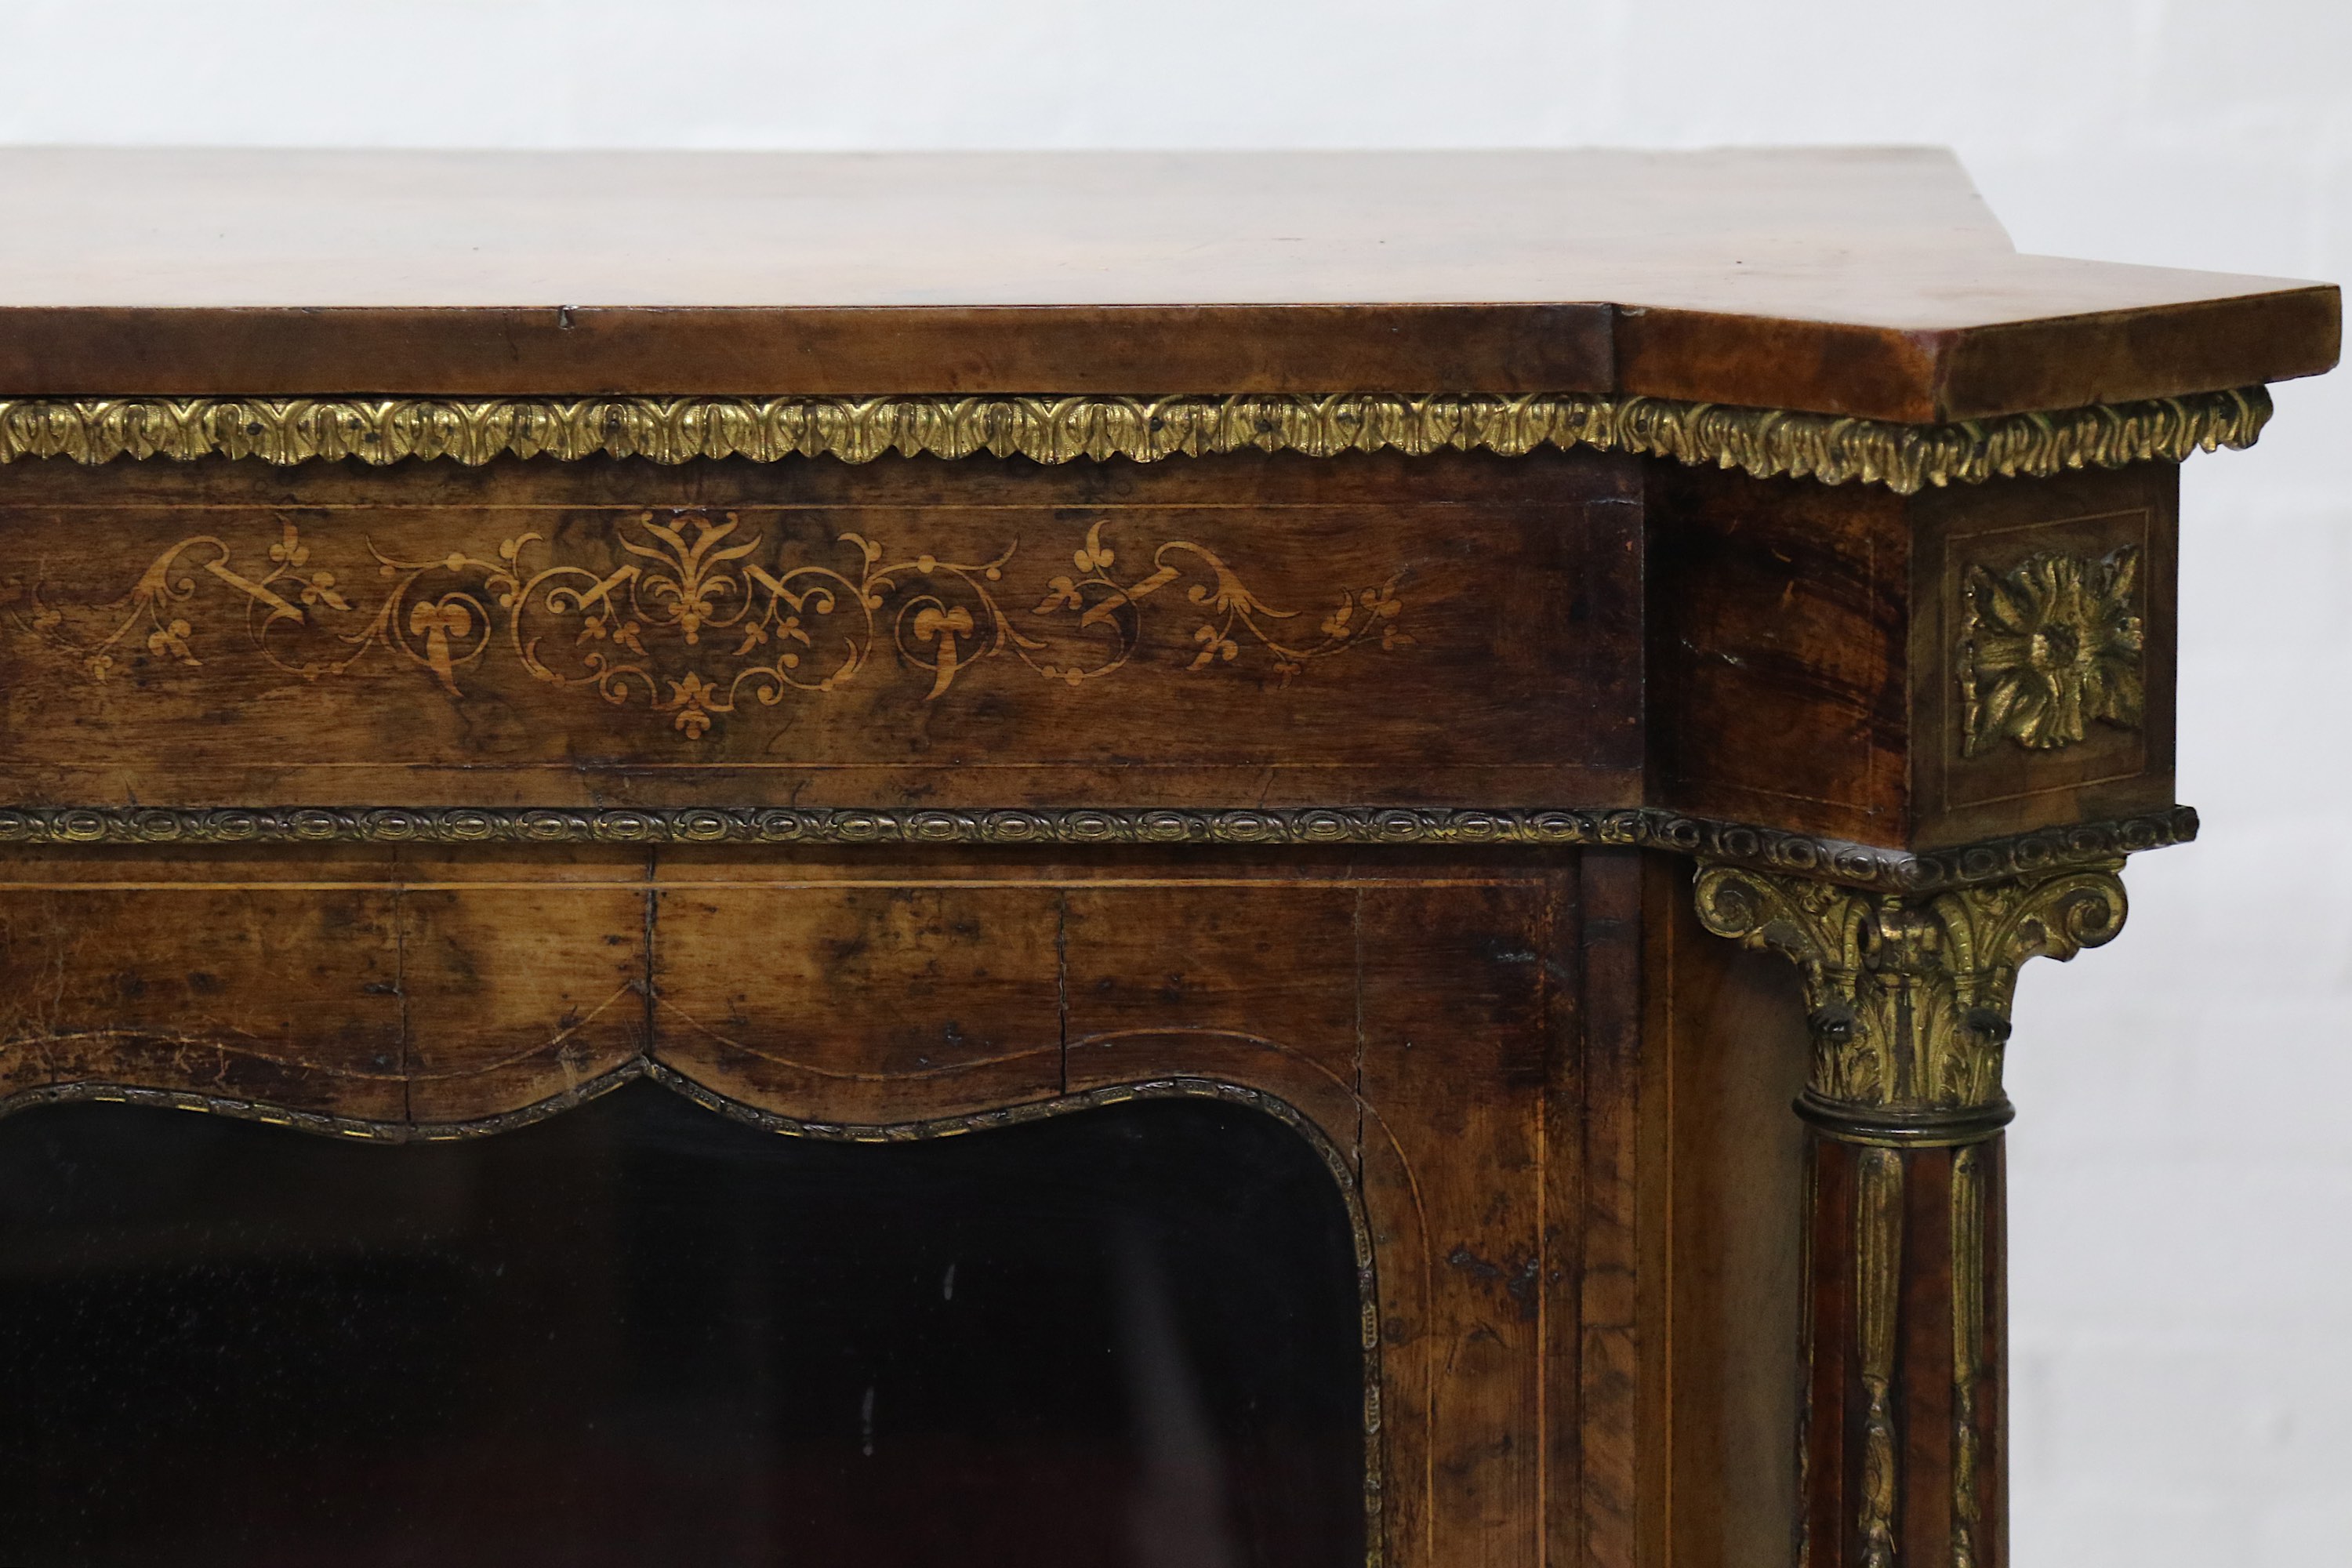 A fine Victorian marquetry inlaid burr walnut credenza, circa 1870, with three glazed doors - Image 3 of 4